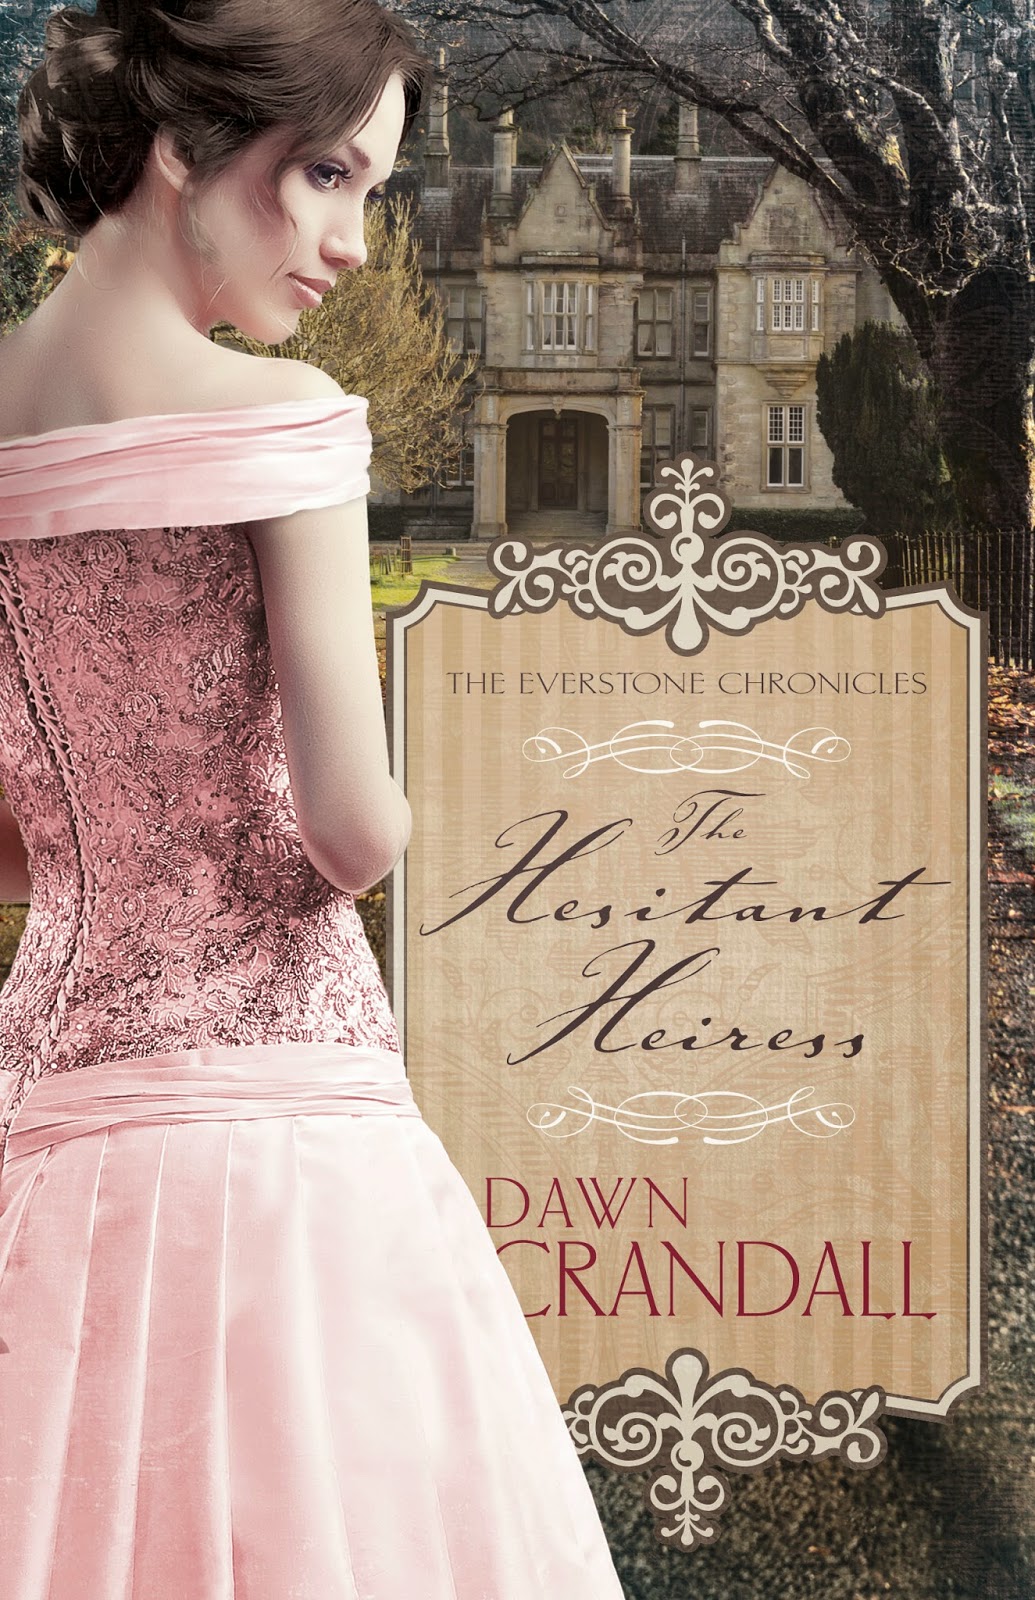 COTT: The Hesistant Heiress by Dawn Crandall